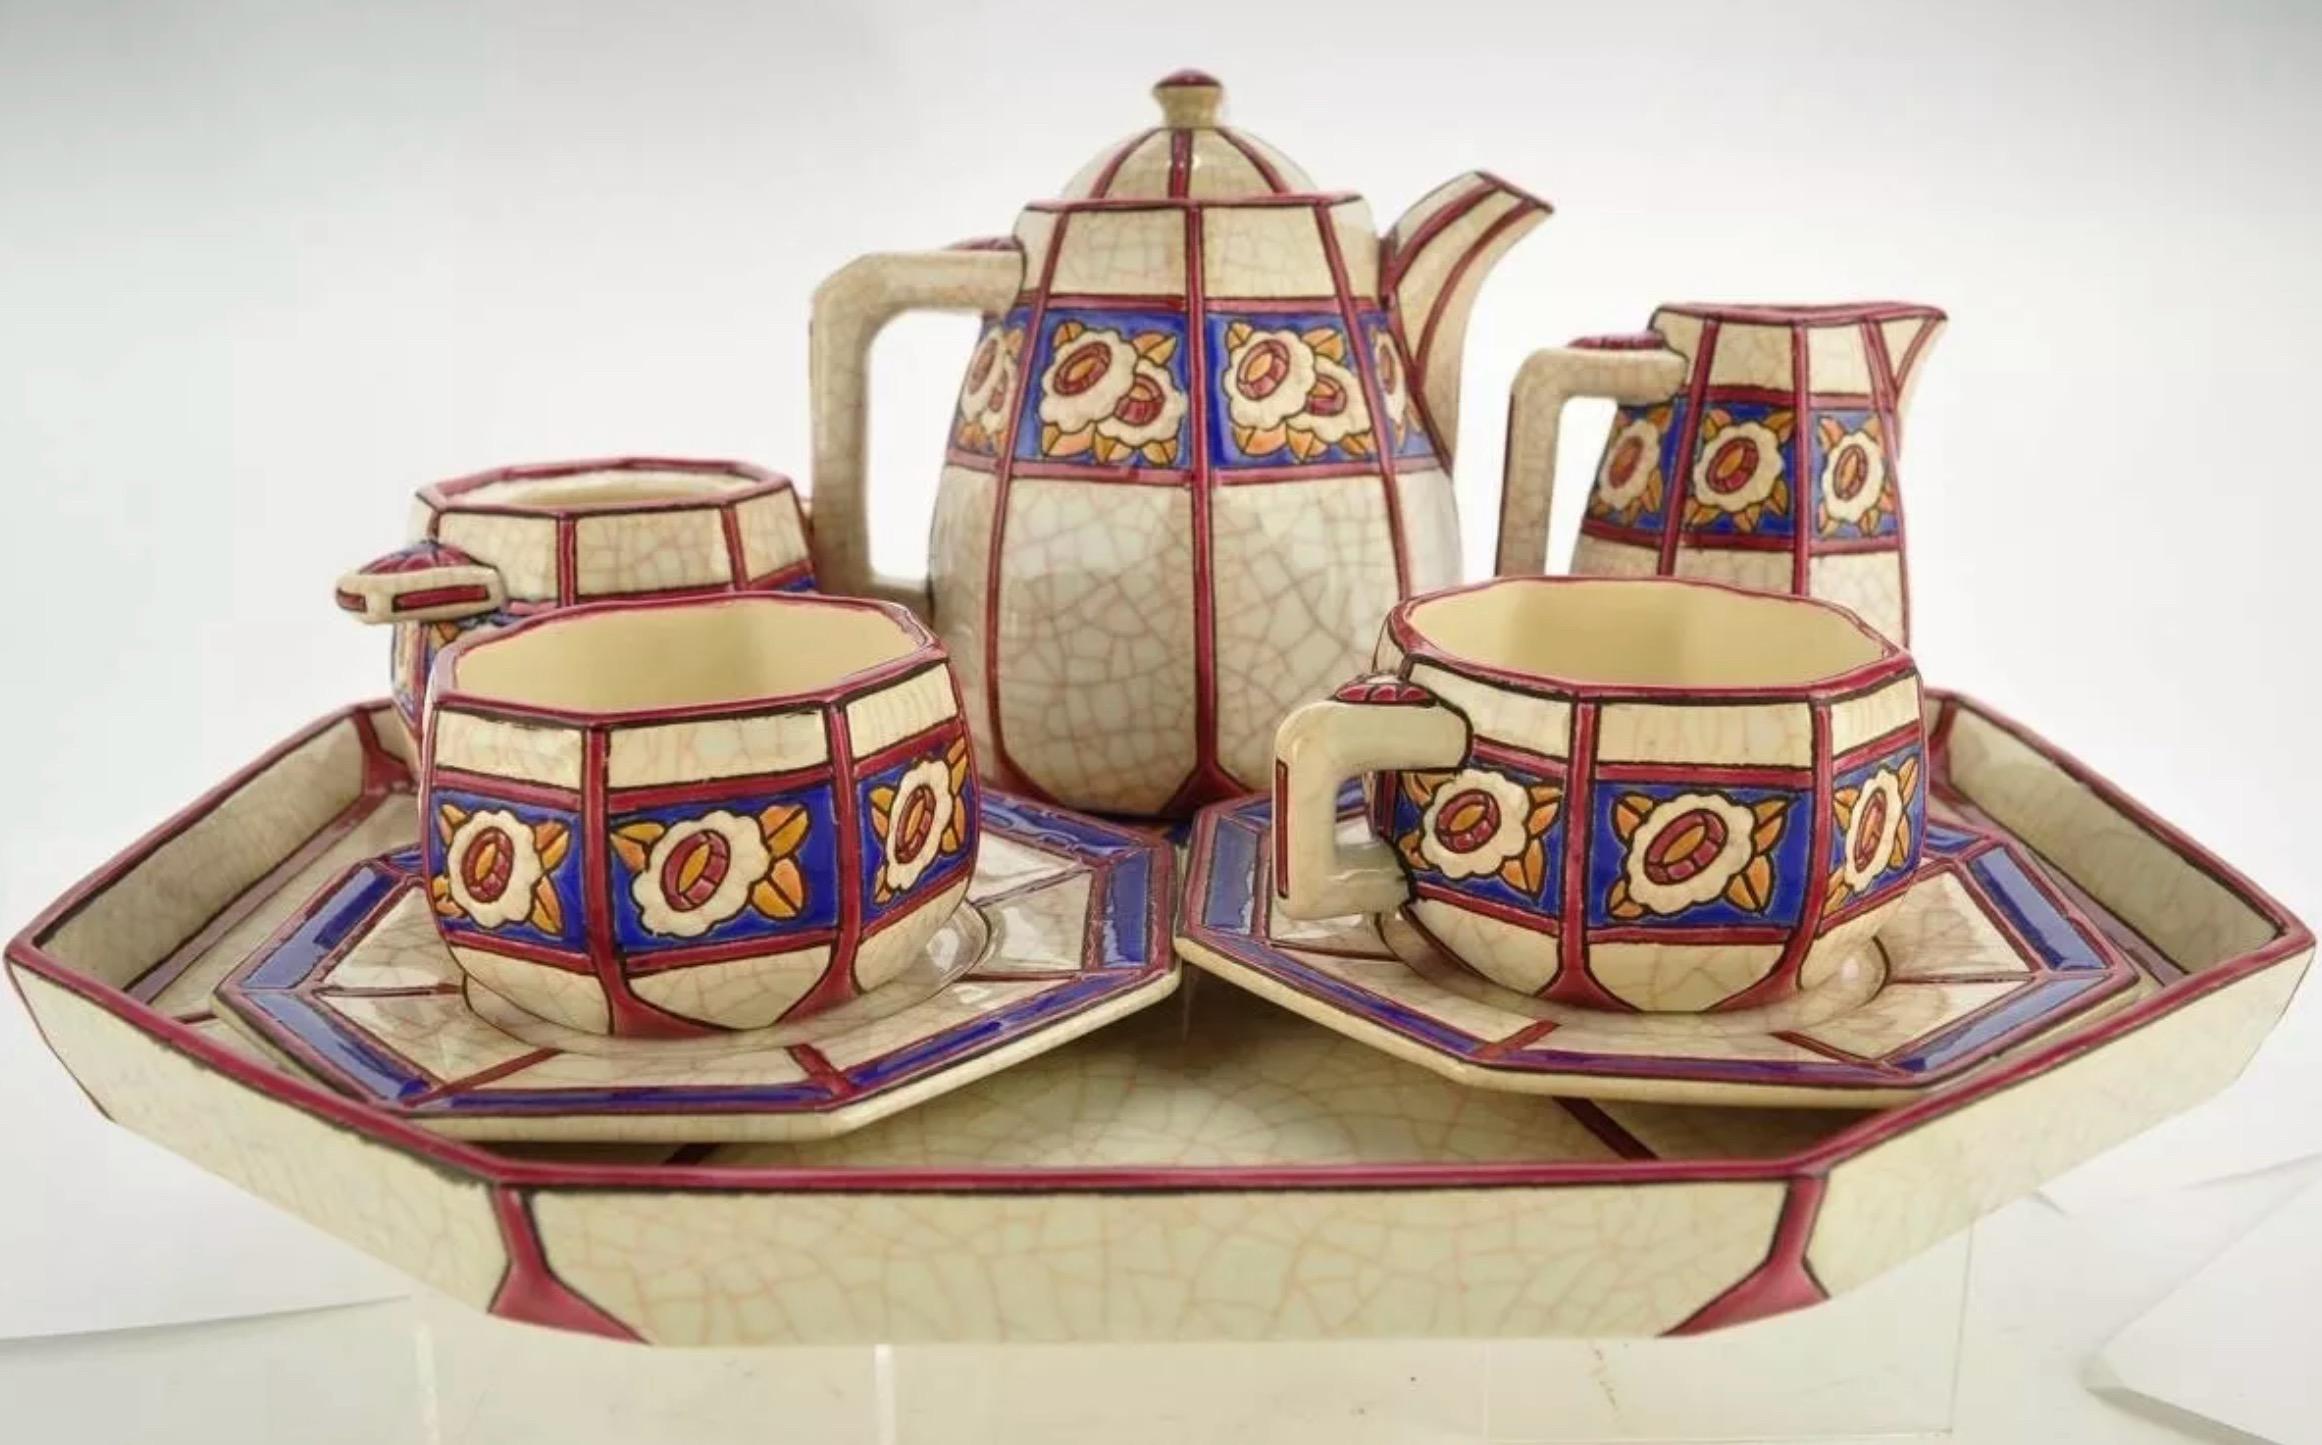 Longwy French ceramic Cloisonné Art Deco coffee tea suite. Perfect original condition with all matching pieces. Octagon shaped large tray, coffee or tea dispenser with creamer, sugar, and a pair of matching cups and saucers. Very beautiful suite of